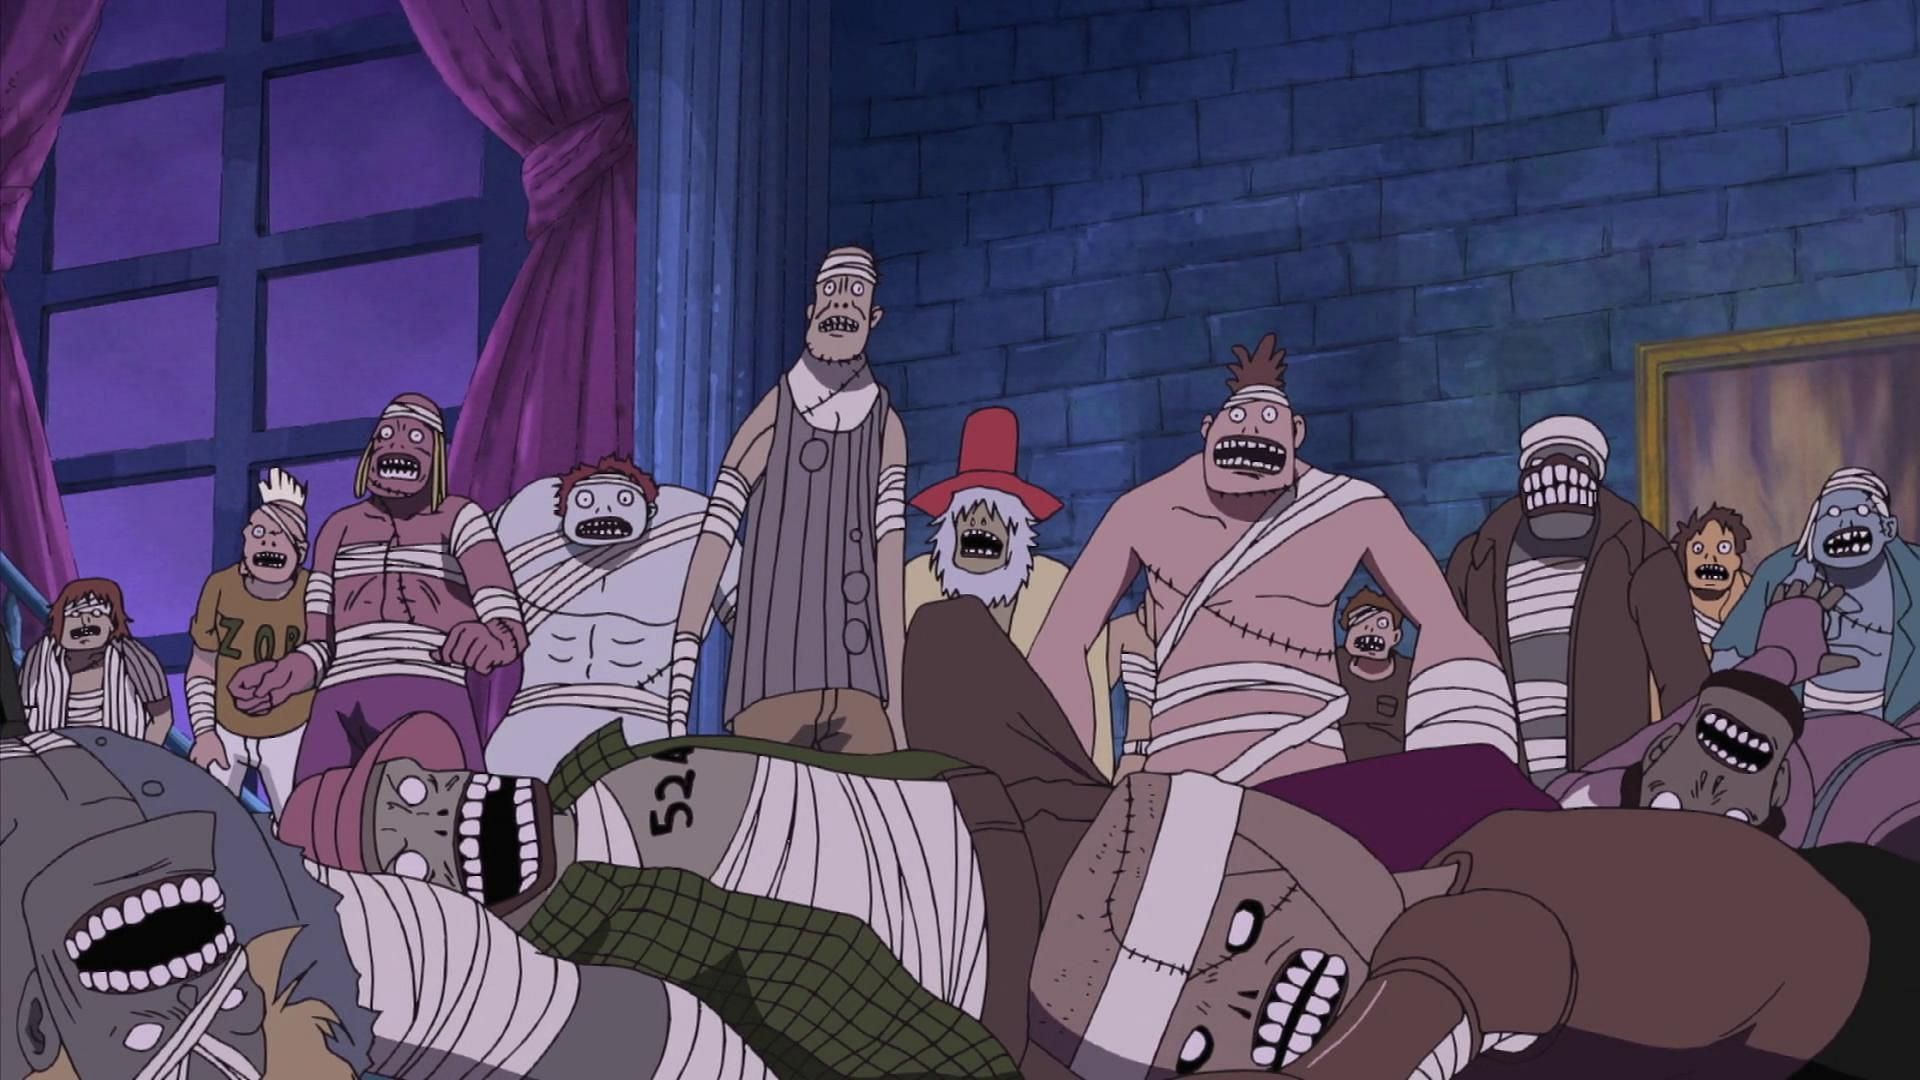 Some Zombies as seen in One Piece (Image via Toei Animation)